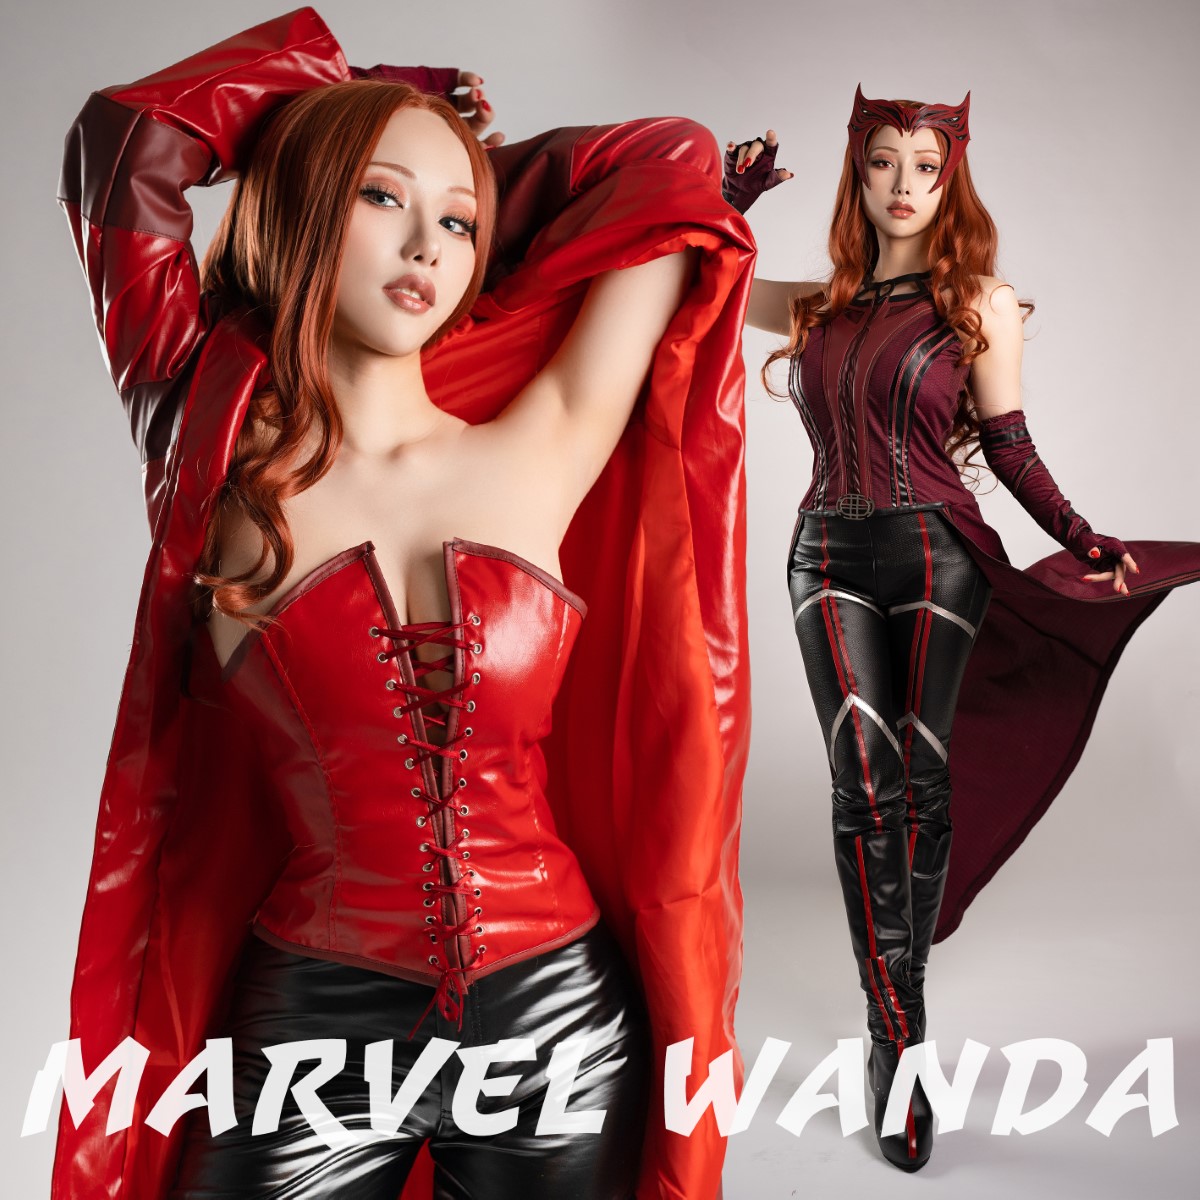 Coser@HaneAme Scarlet Witch 0001 2612391848.jpg